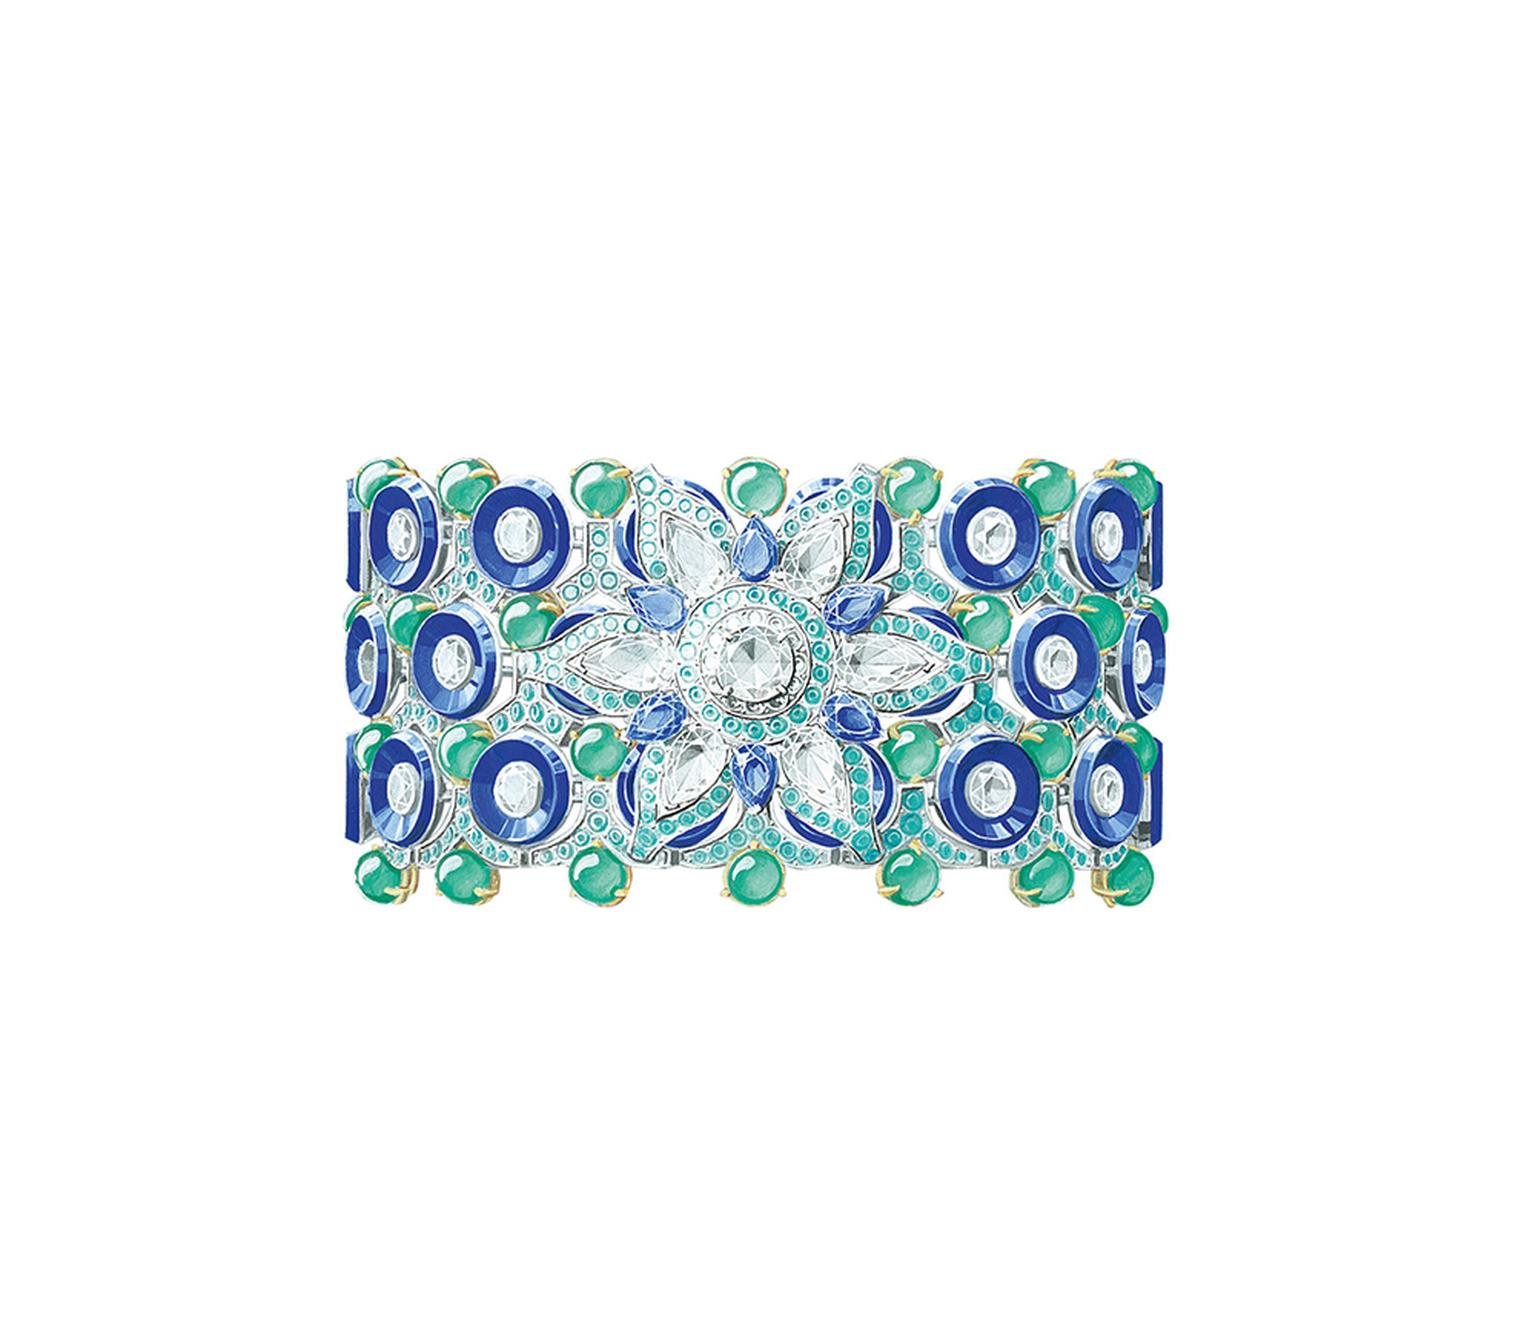 Van Cleef & Arpels Geometric Flower bracelet from the Pierres de Caractere Variations collection with pear-shaped sapphires, lapis lazuli, chrysoprase beads, Paraiba-like tourmalines and round diamonds set in white and yellow gold.